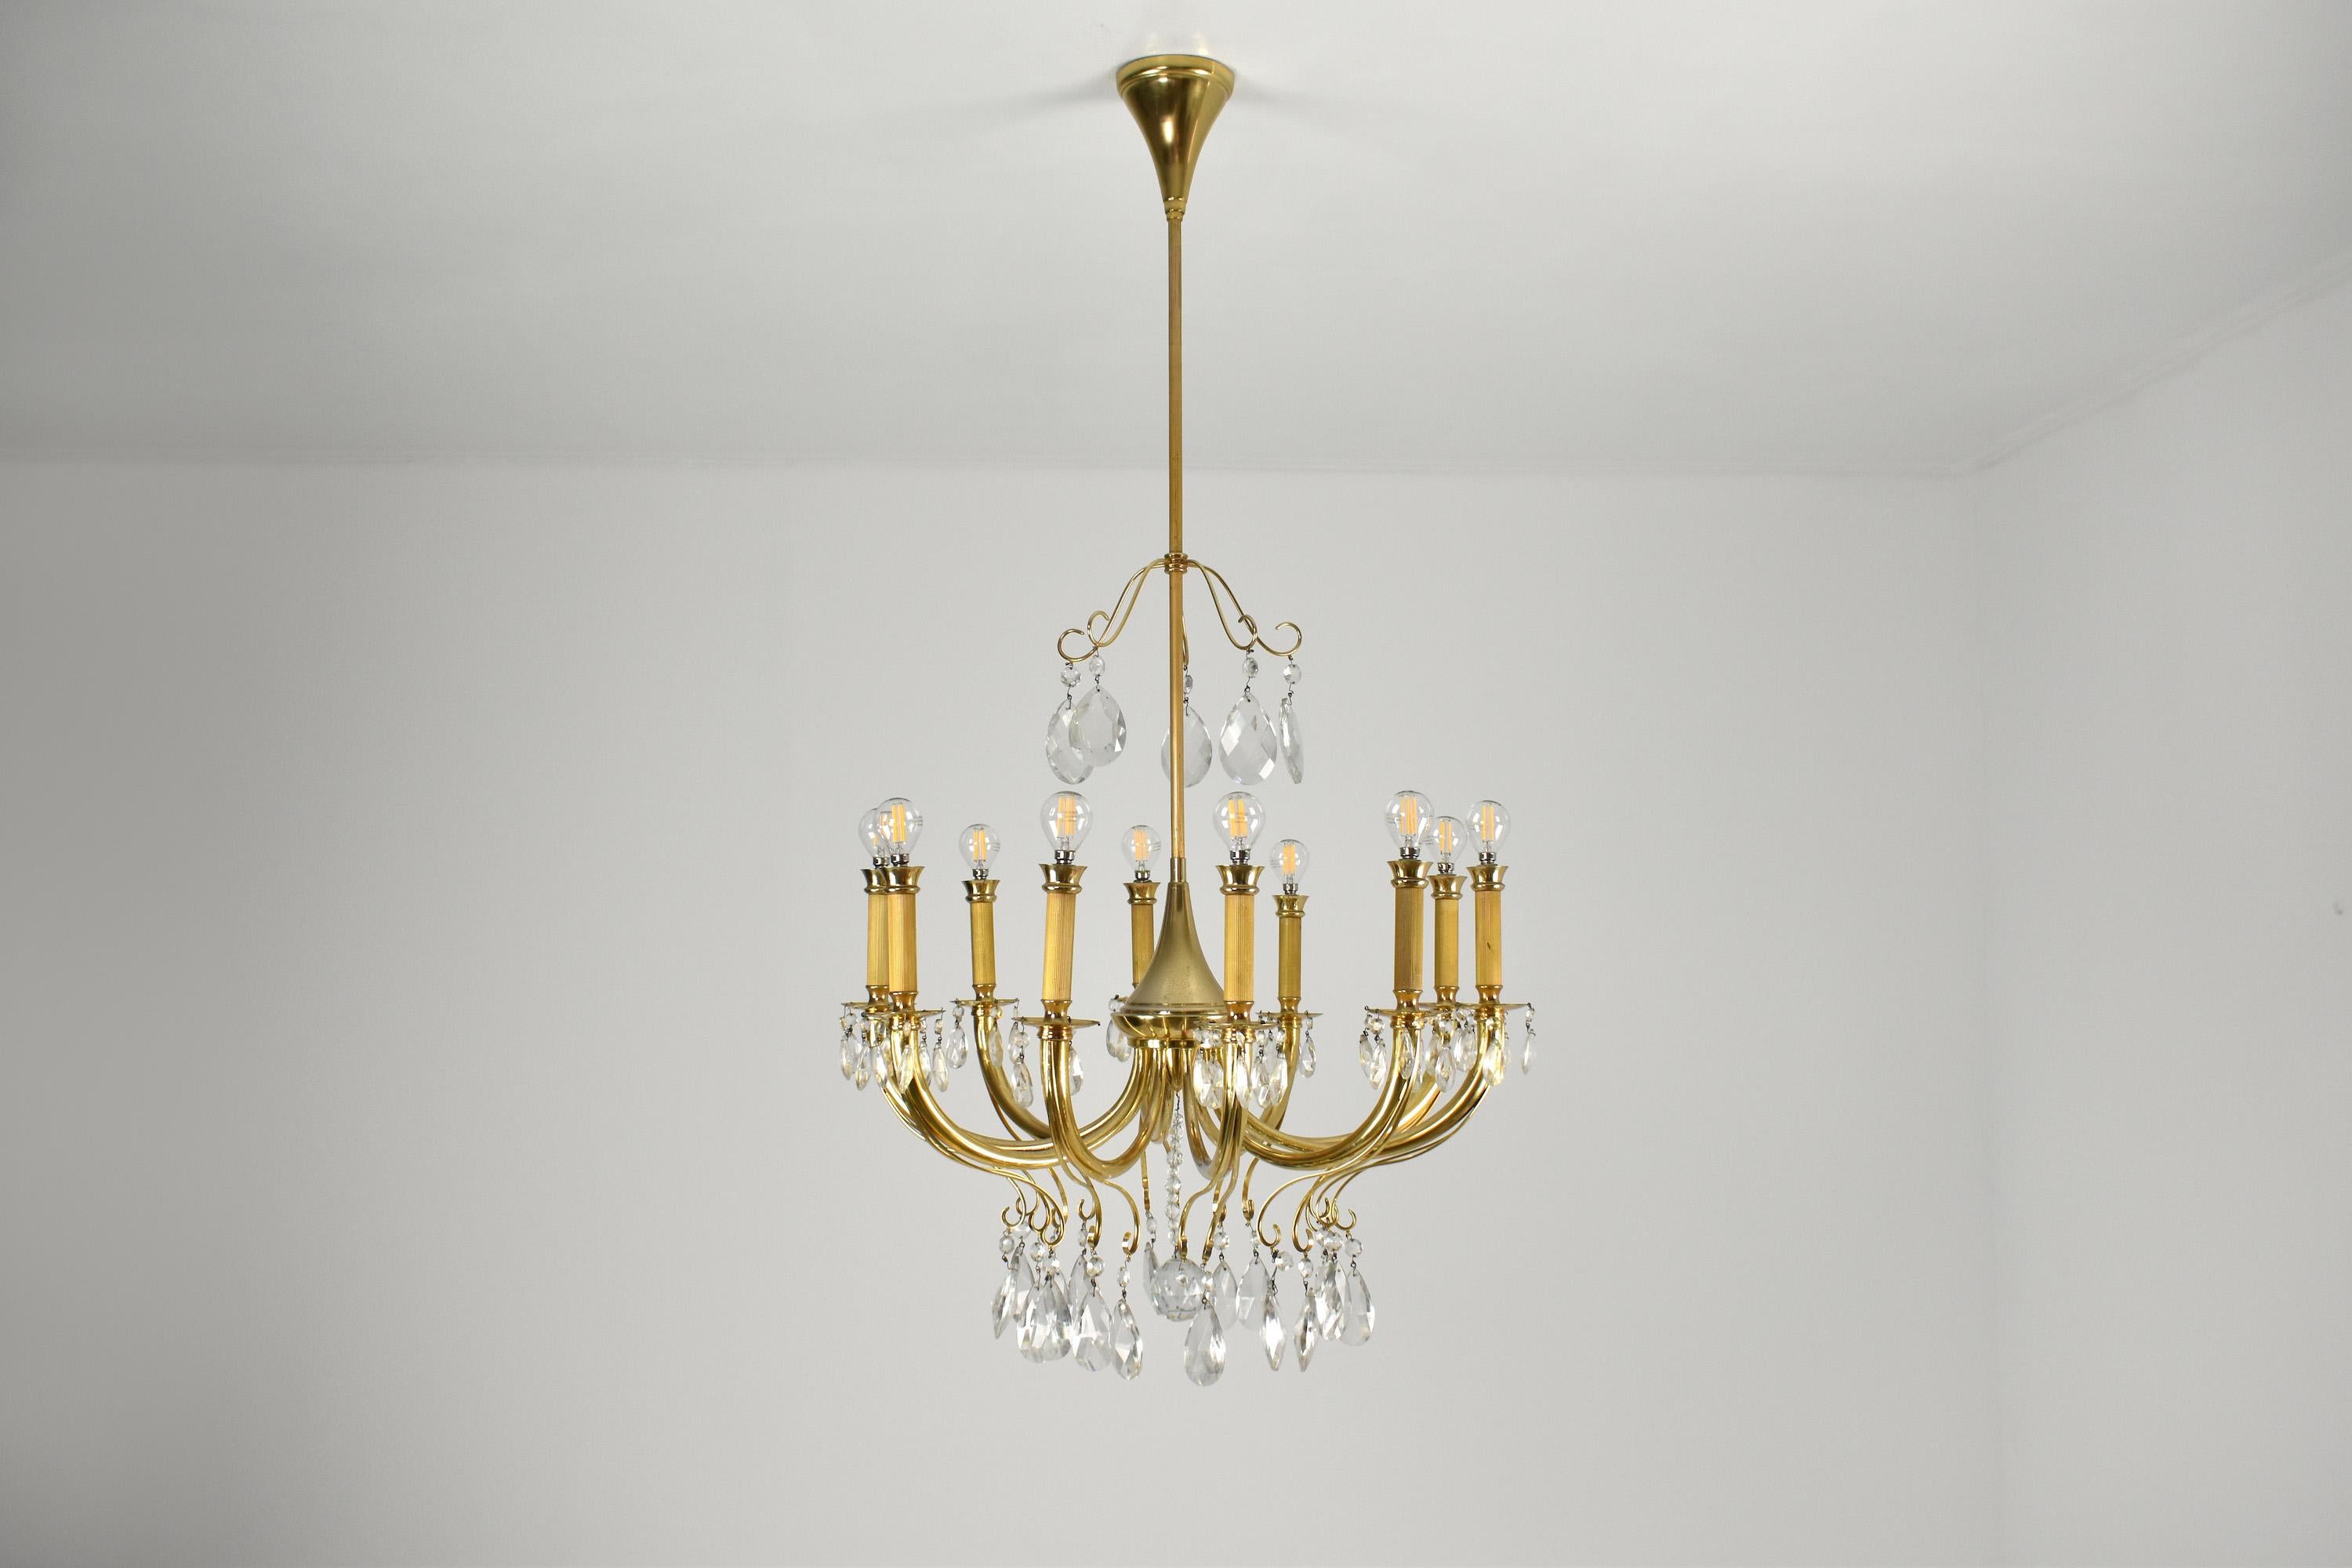 A fantastic 20th-century Italian vintage 10-light chandelier from the 1950's hanging via a slender solid brass structure. 
Beautiful gold brass candelabra style light. 
Professionally restored. 
Original label. 

-------
We are an exhibition